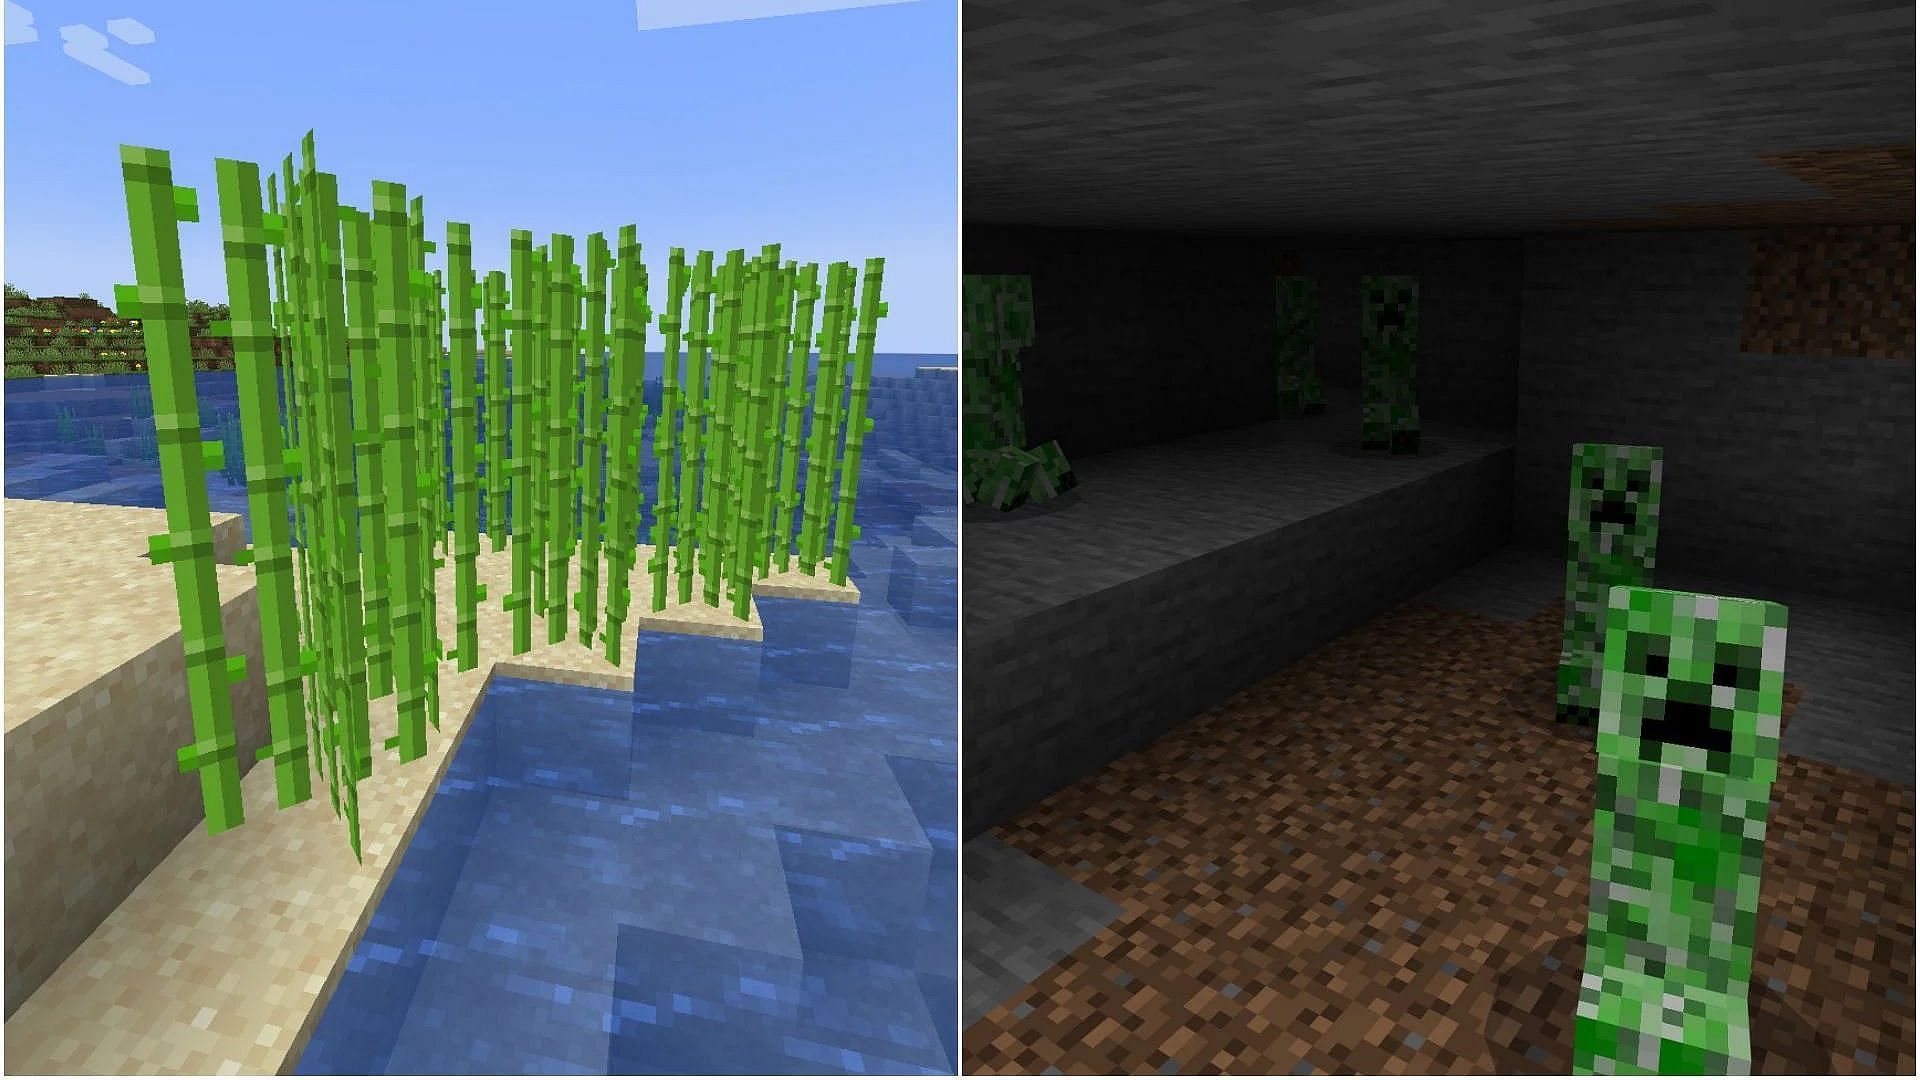 To craft loads of fireworks in Minecraft, players will need Creeper and Sugarcane farm (Image via Sportskeeda)